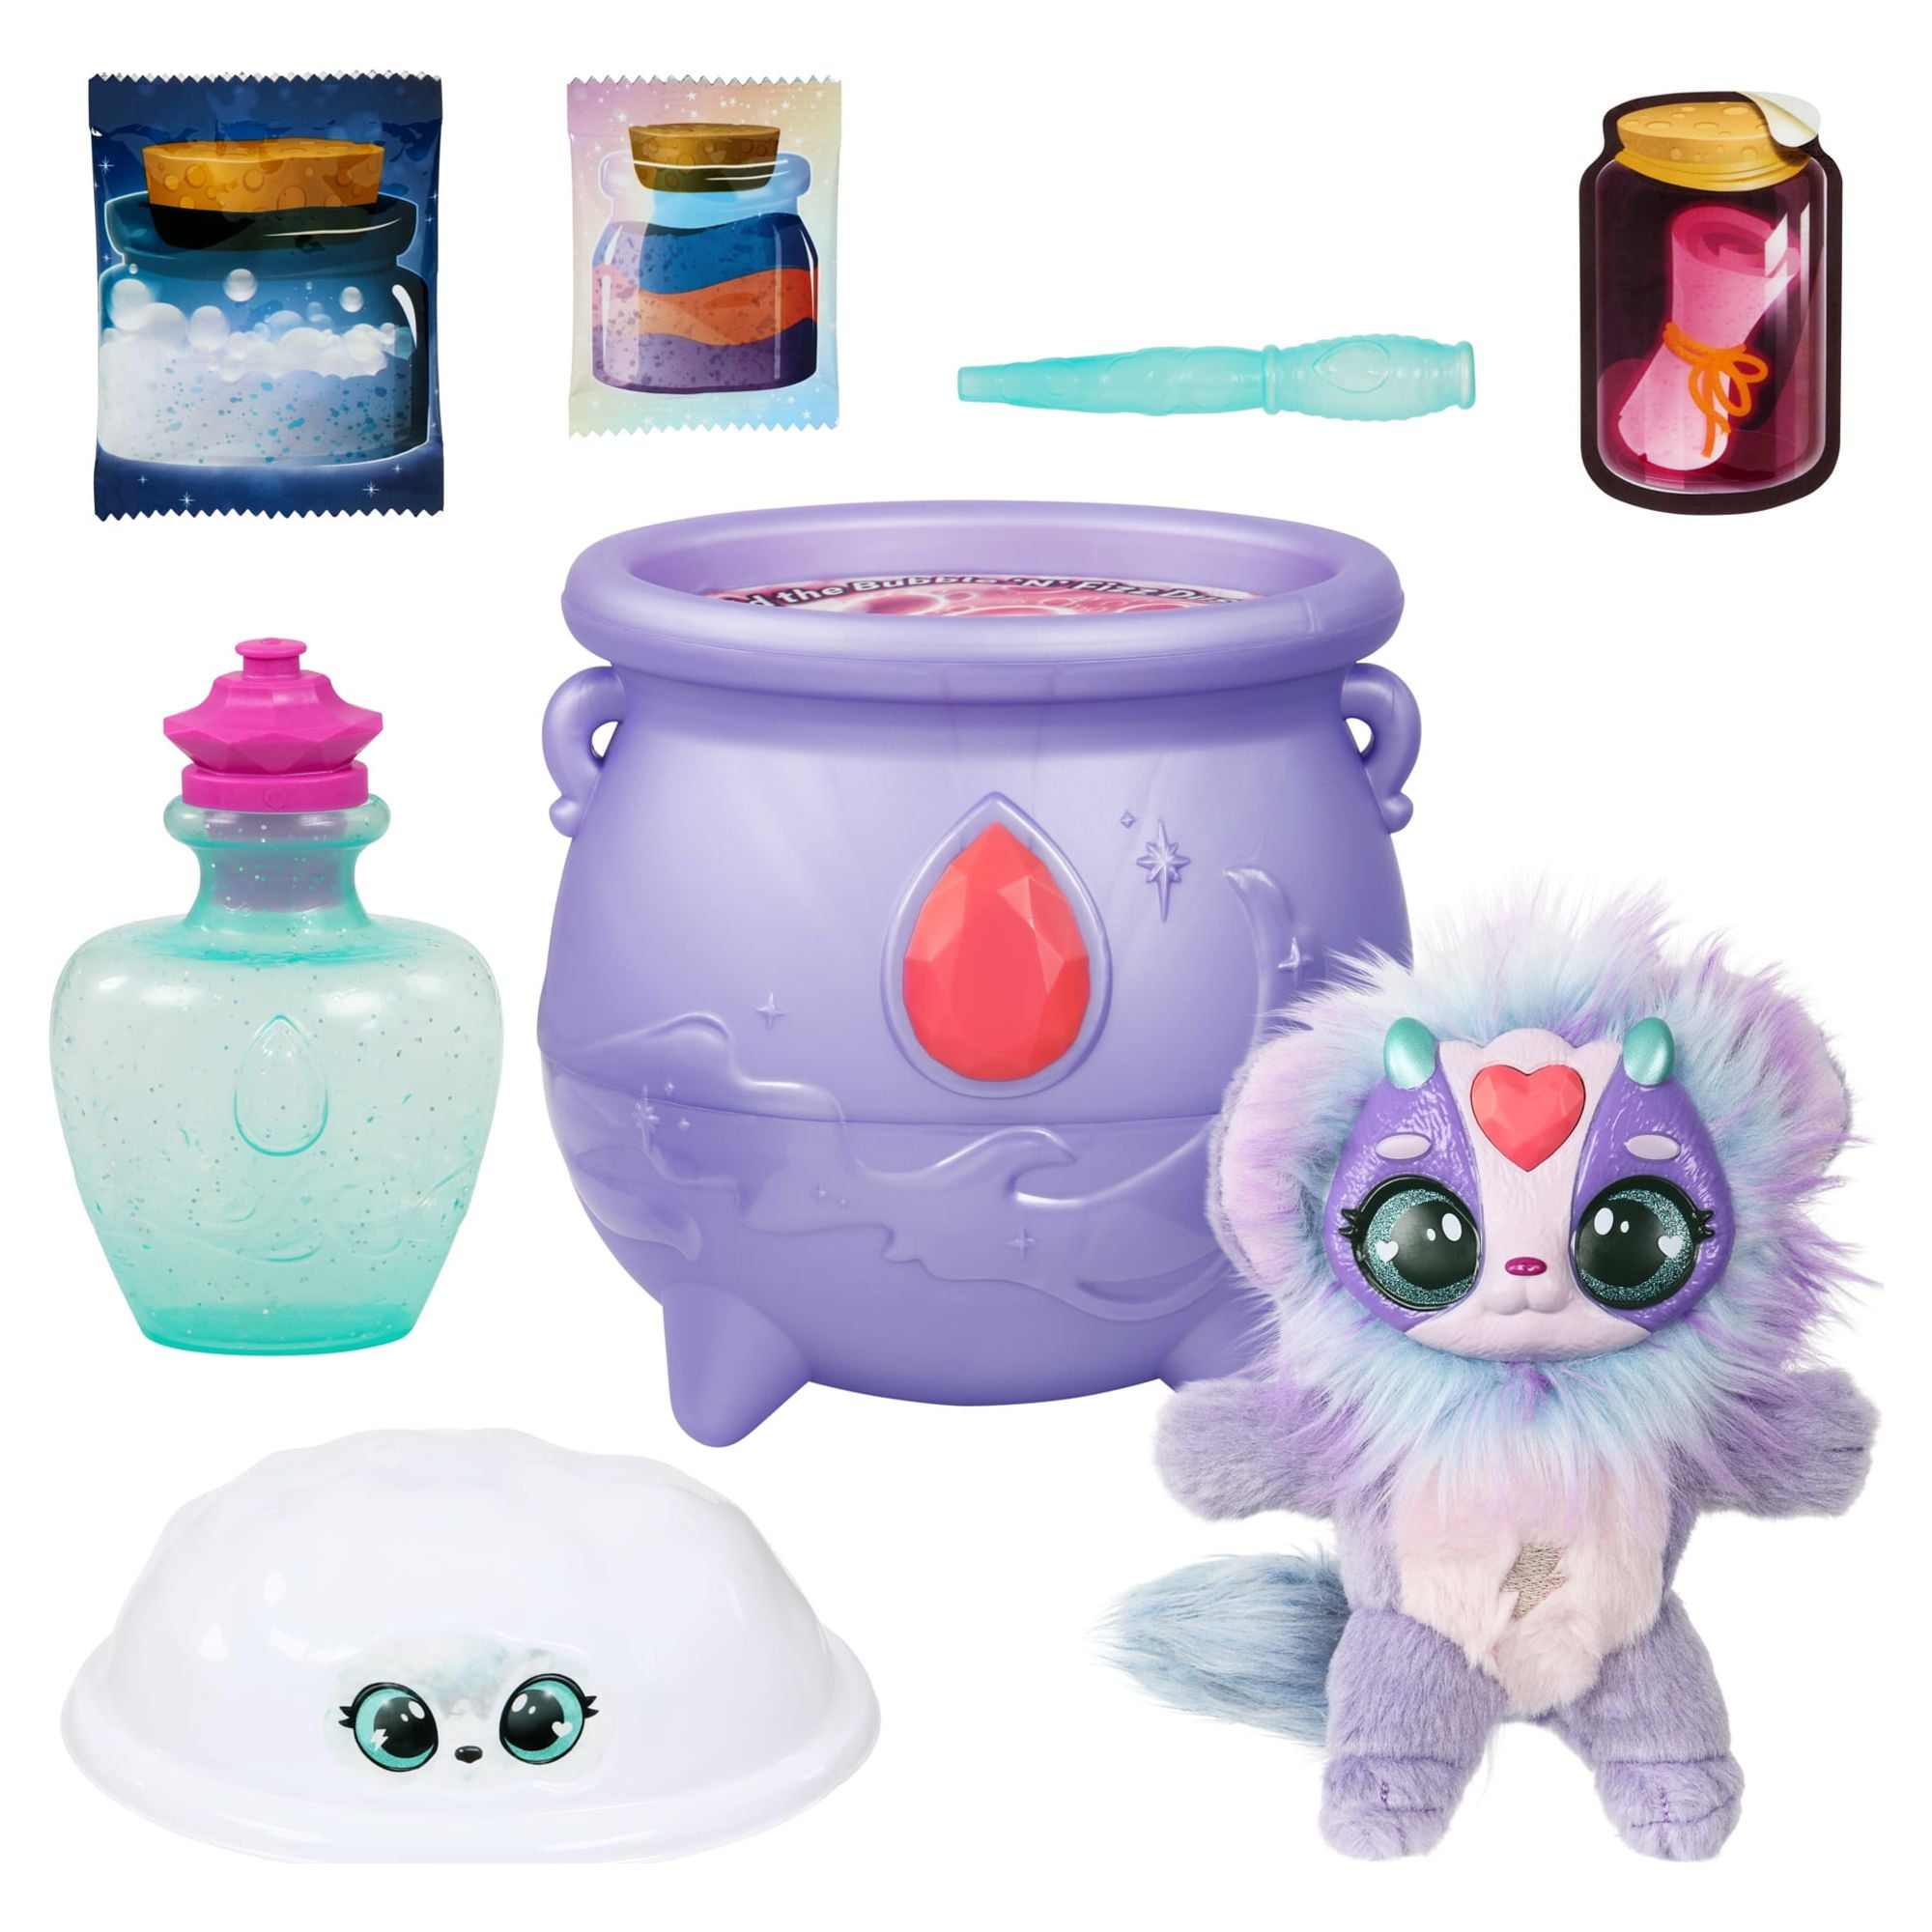 Magic Mixies Color Surprise Magic Purple Cauldron, Colors and Styles May  Vary, Ages 5+